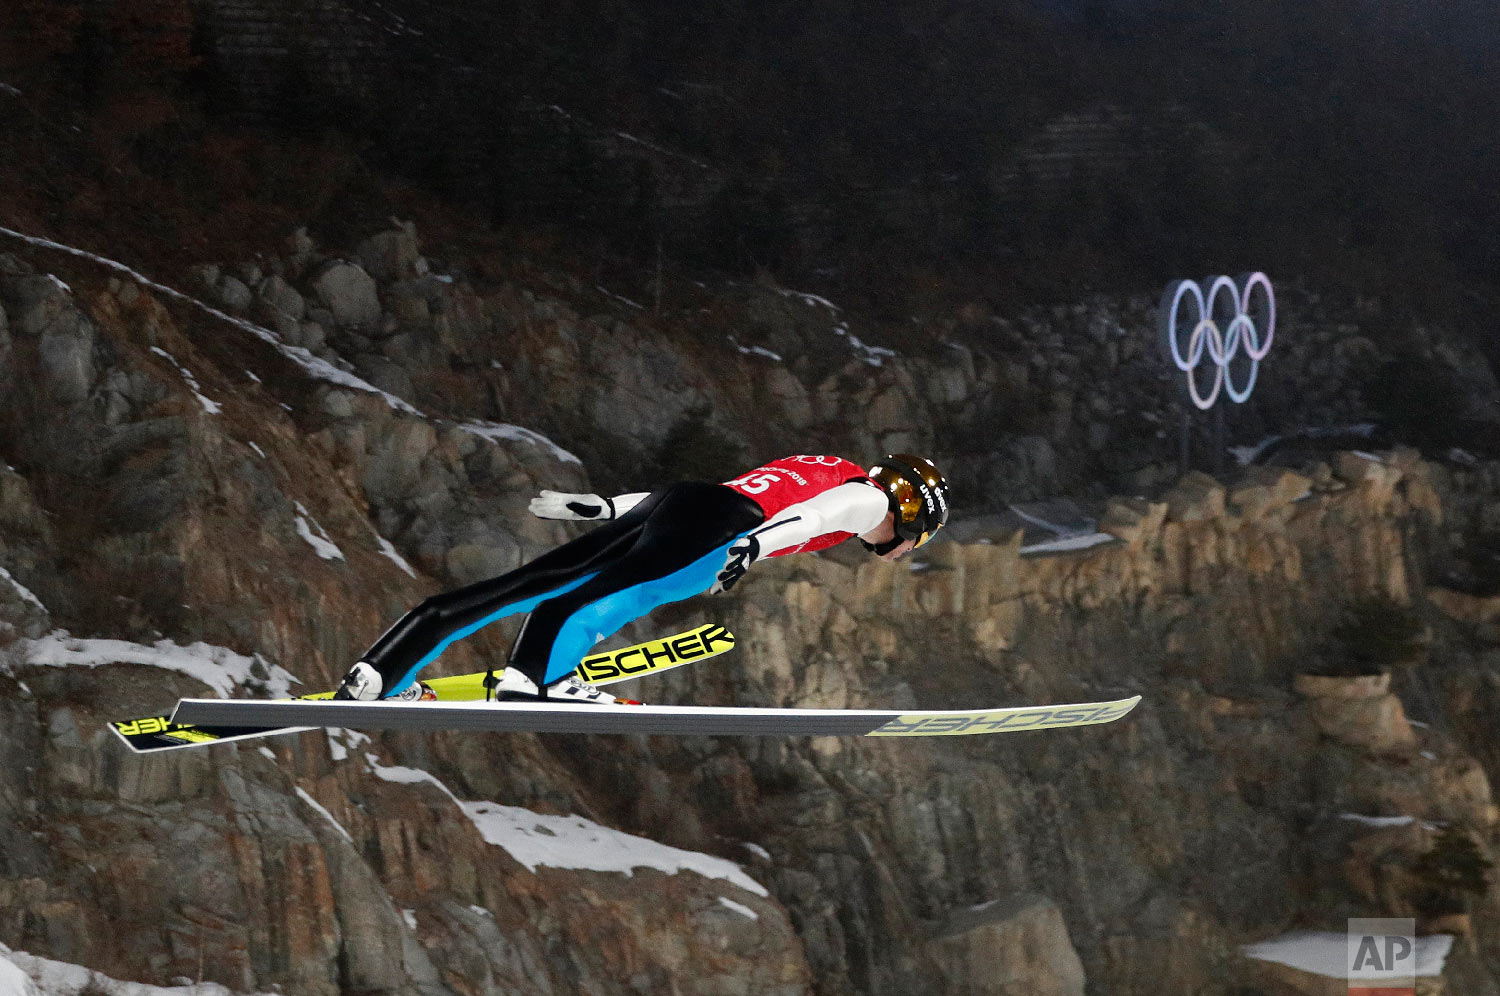  Vinzenz Geiger of Germany soars during a training session for the men's nordic combined competition at the Alpensia Ski Jumping Center during the 2018 Winter Olympics in Pyeongchang, South Korea, Sunday, Feb. 11, 2018. (AP Photo/Patrick Semansky) 